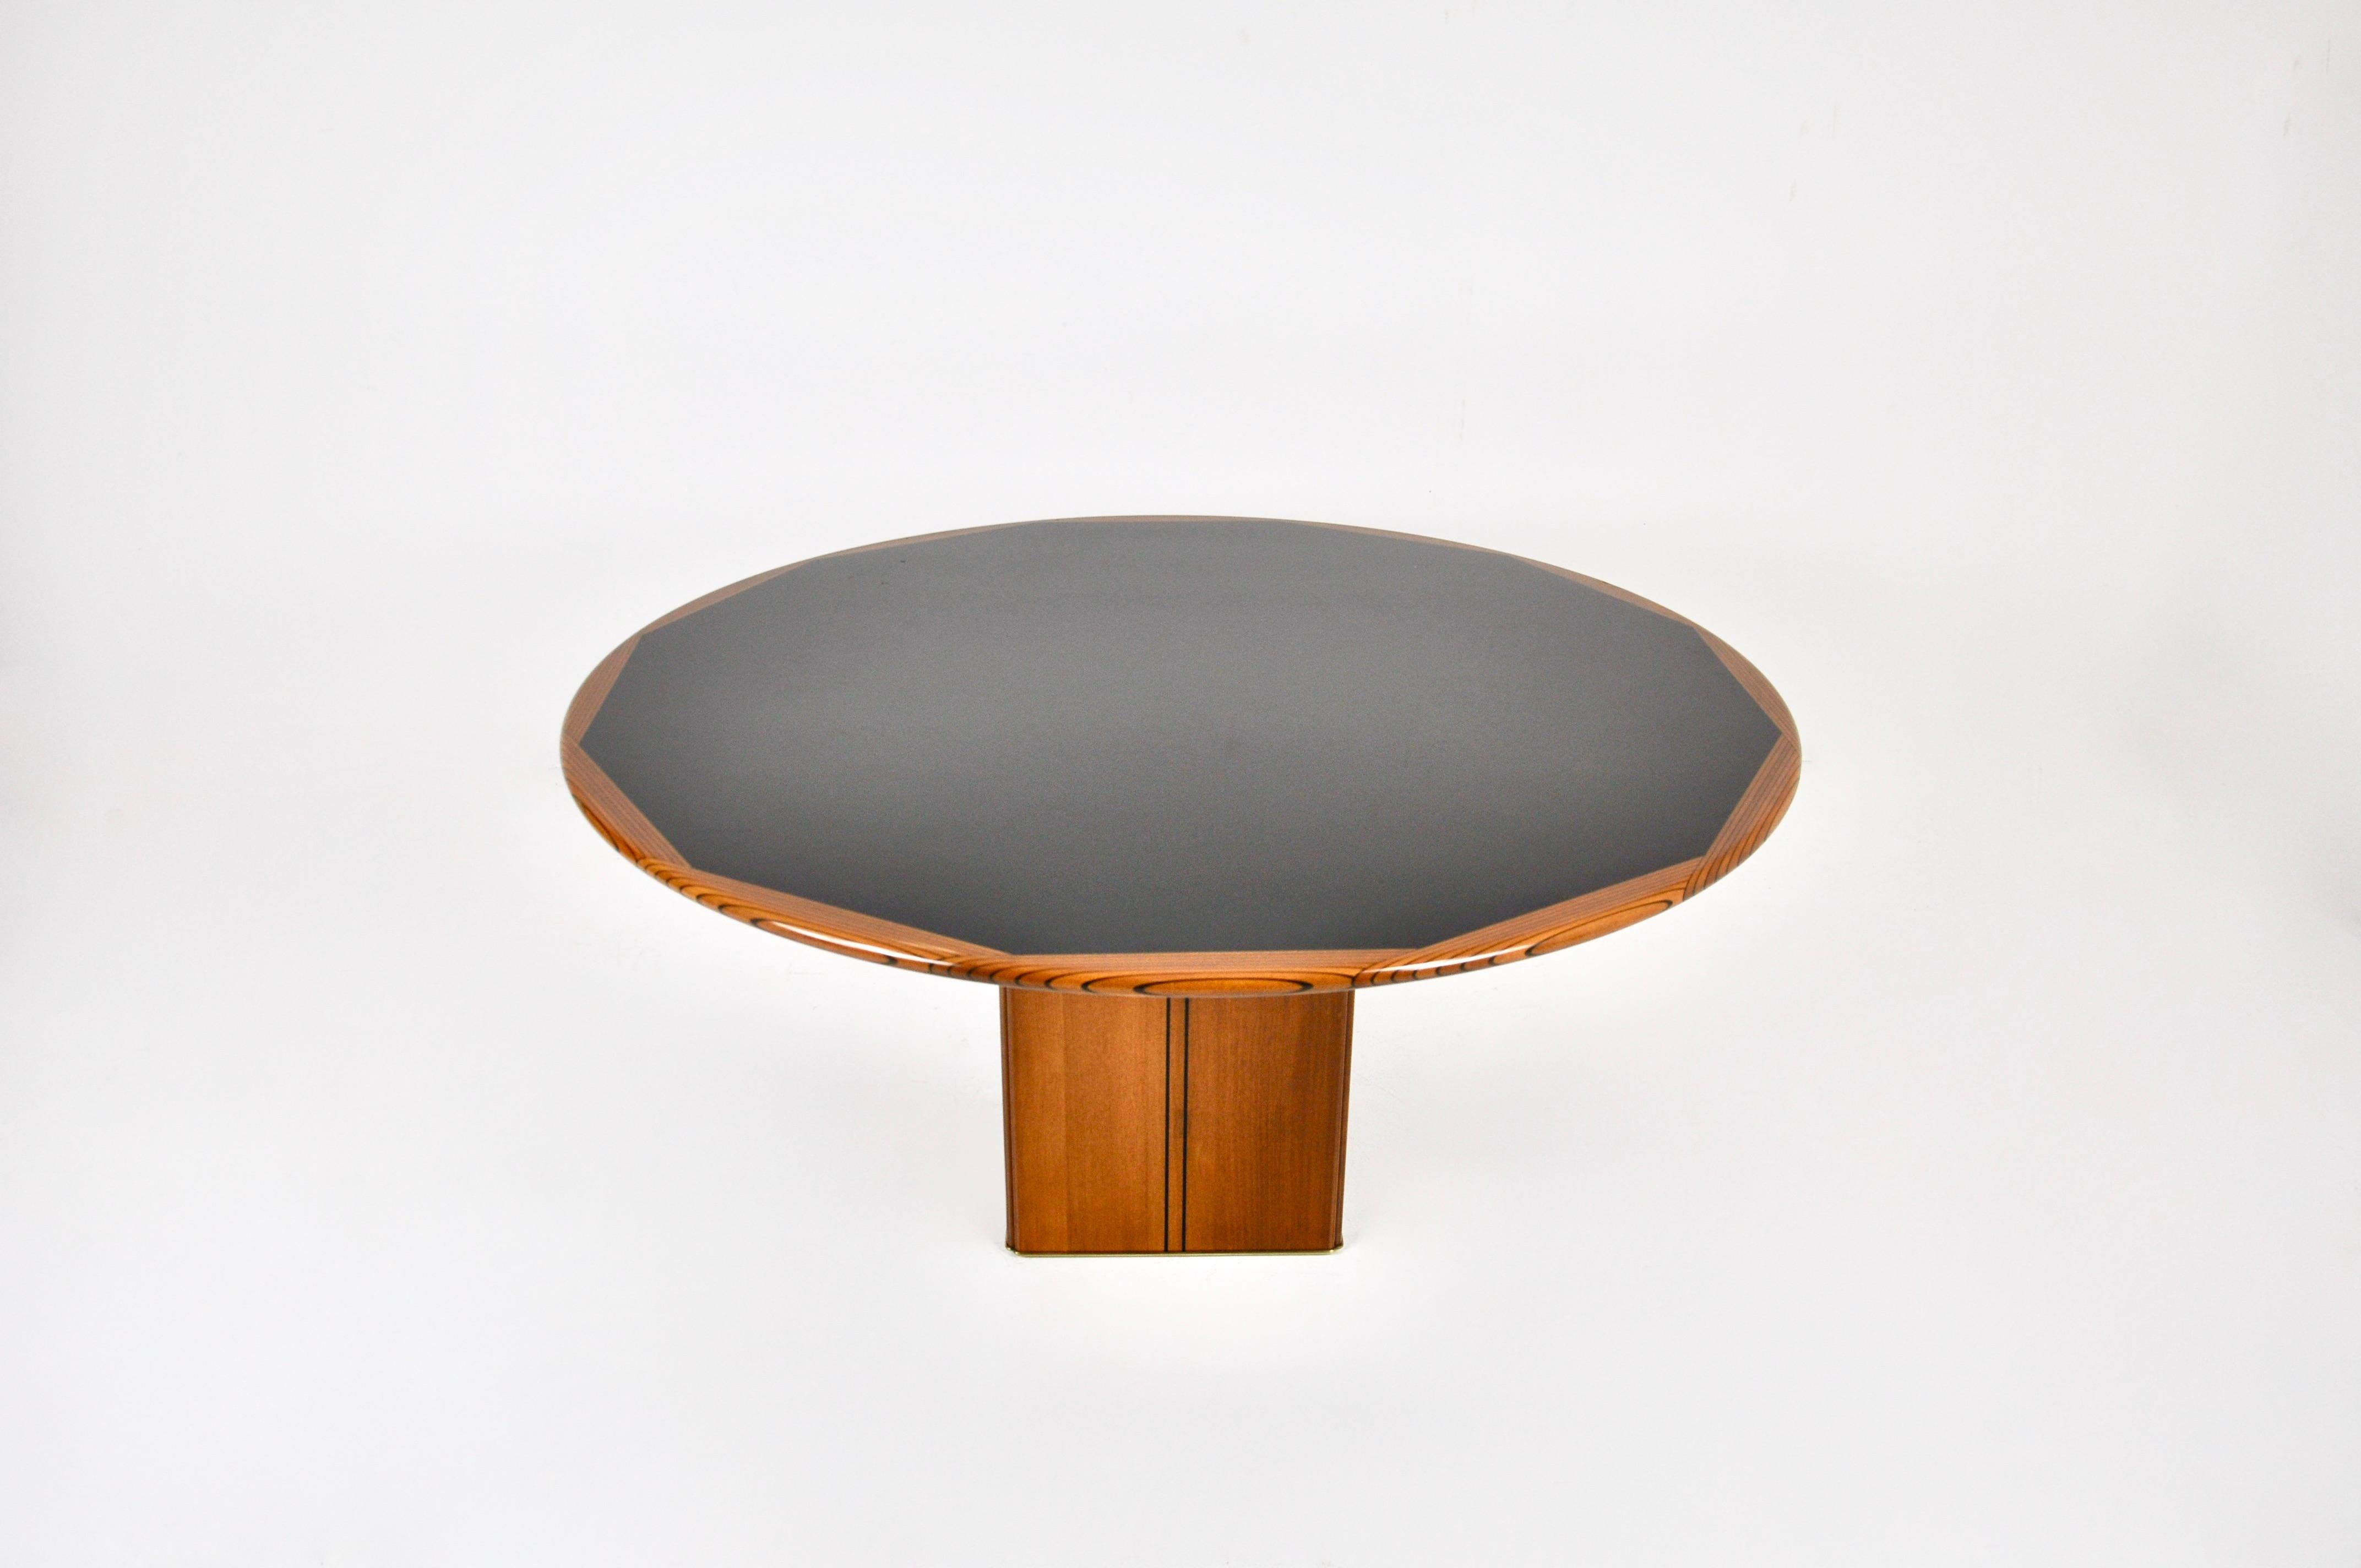 Round wooden table by Tobia and Afra Scarpa. Stamped concrete block inside the table for stability. Wear due to time and age of the table.